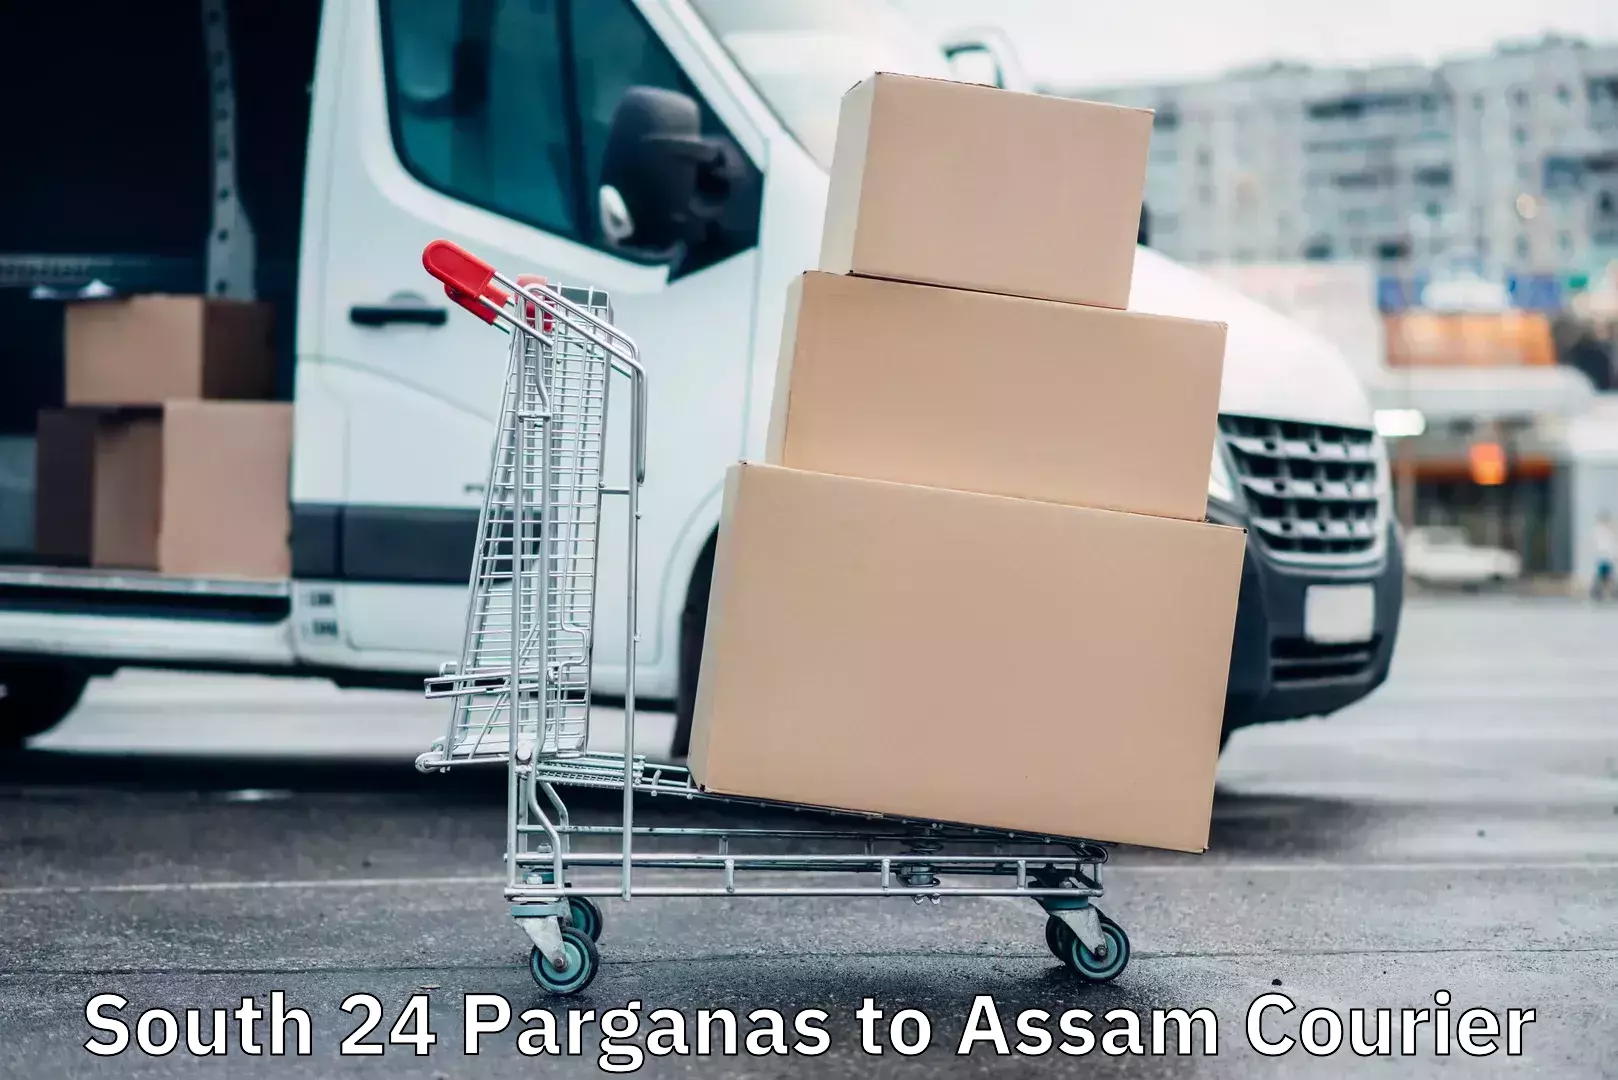 Express package transport South 24 Parganas to Assam